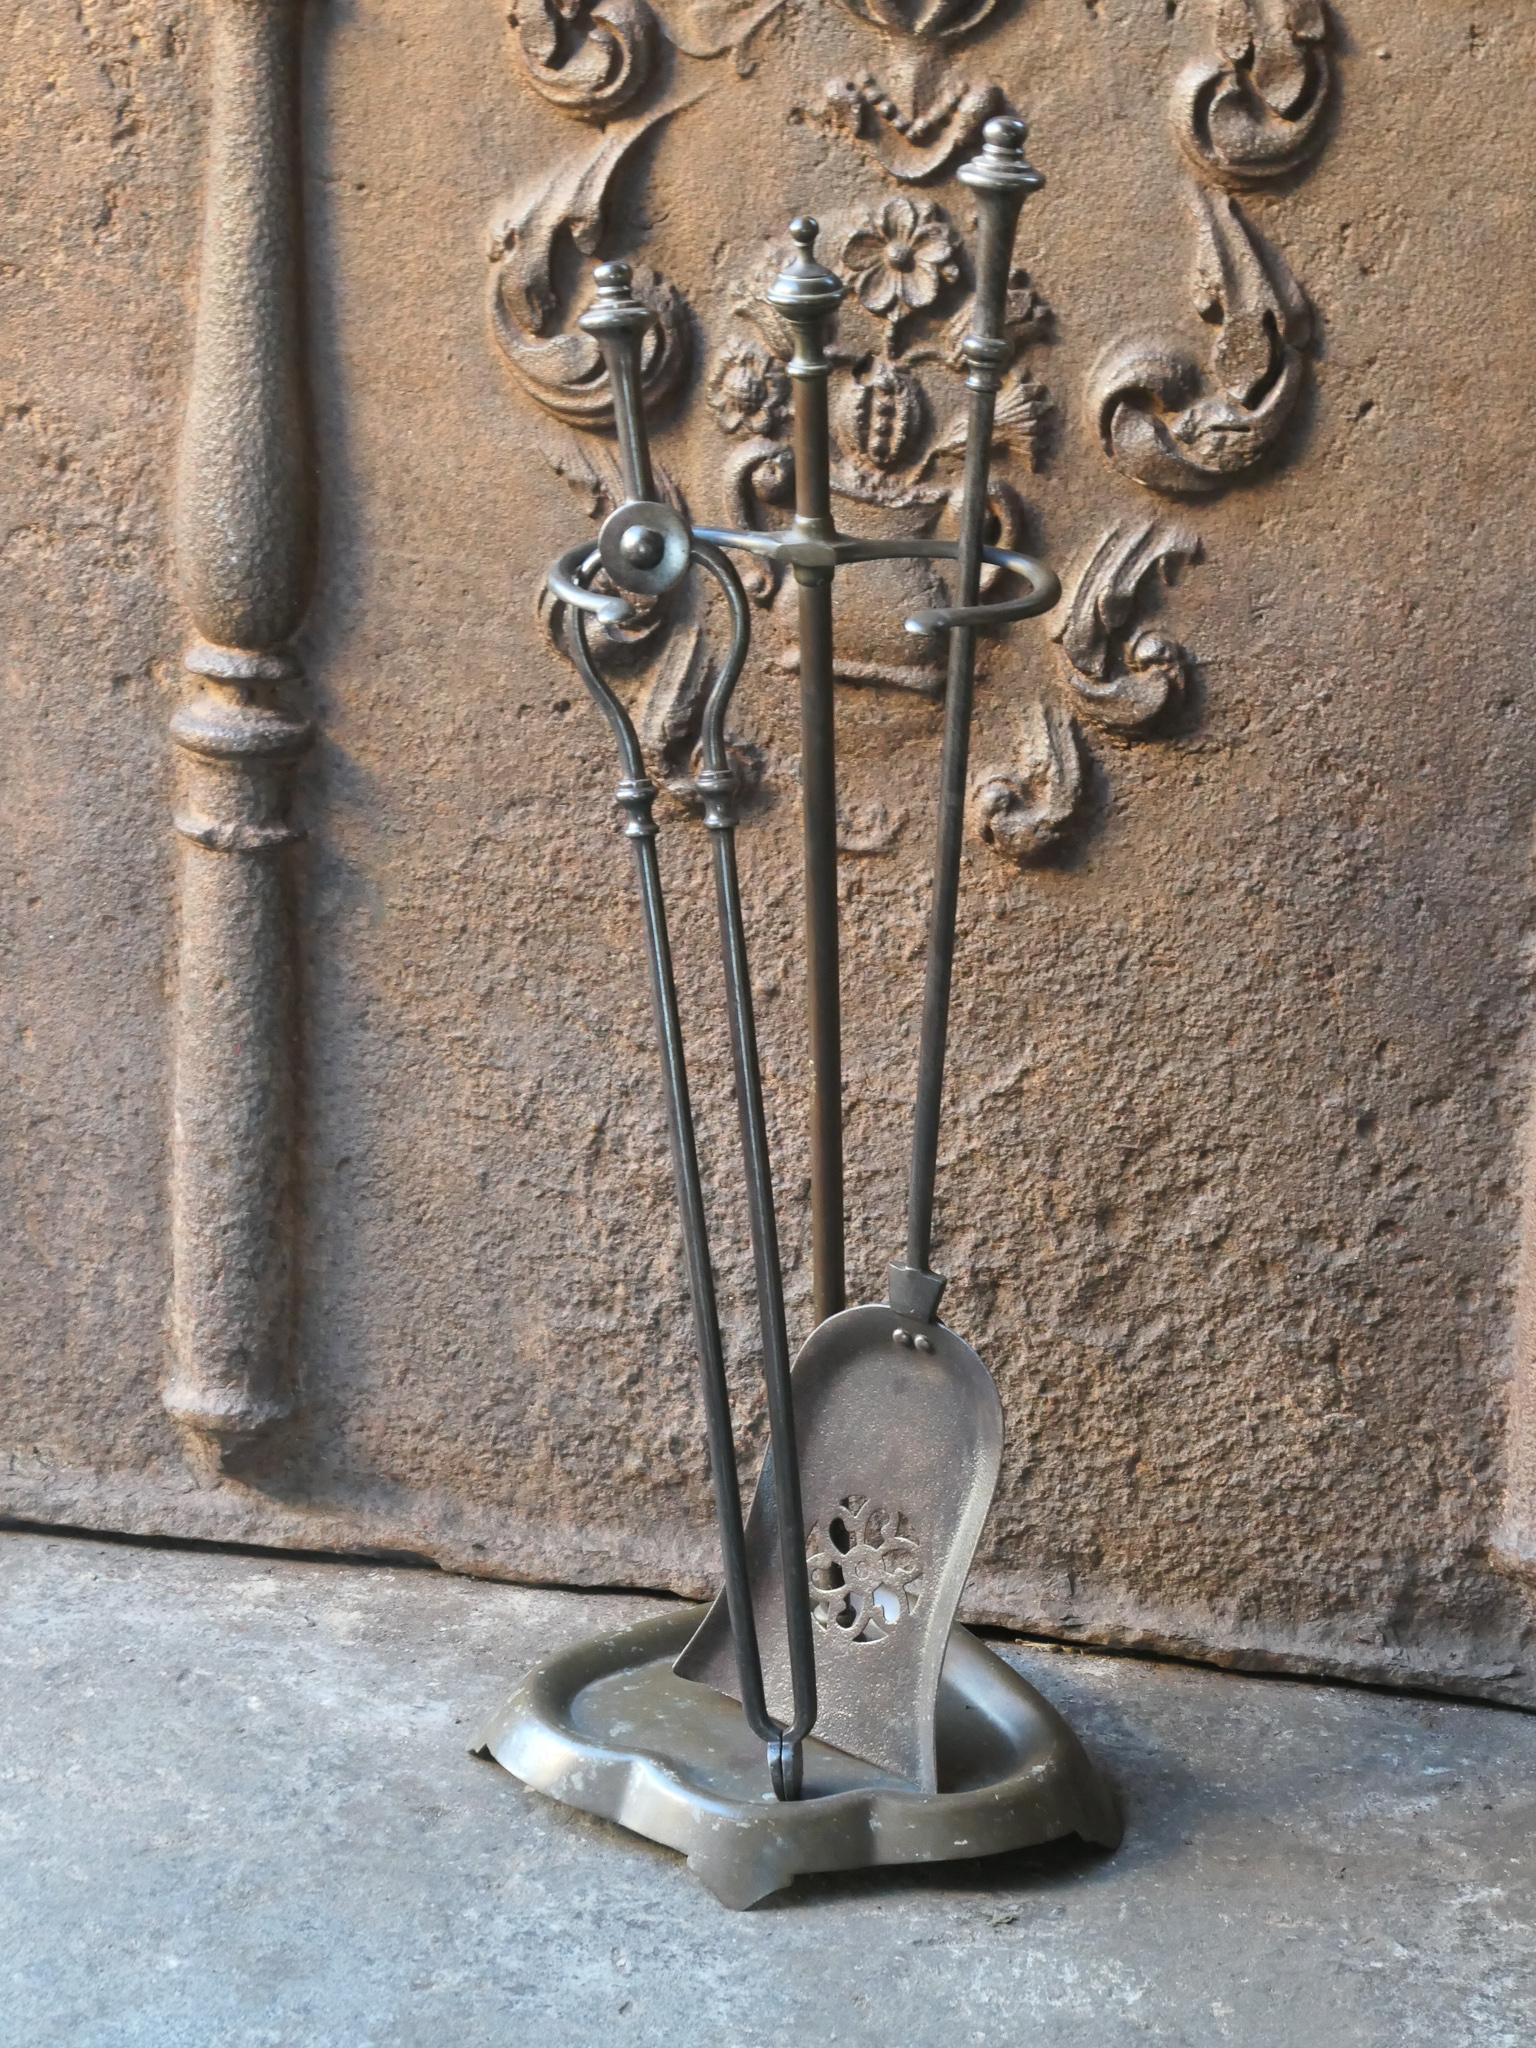 19th century English Victorian fire companion set. The tool set consists of thongs and shovel and stand. Made of wrought iron and brass. It is in a good condition and is fully functional.